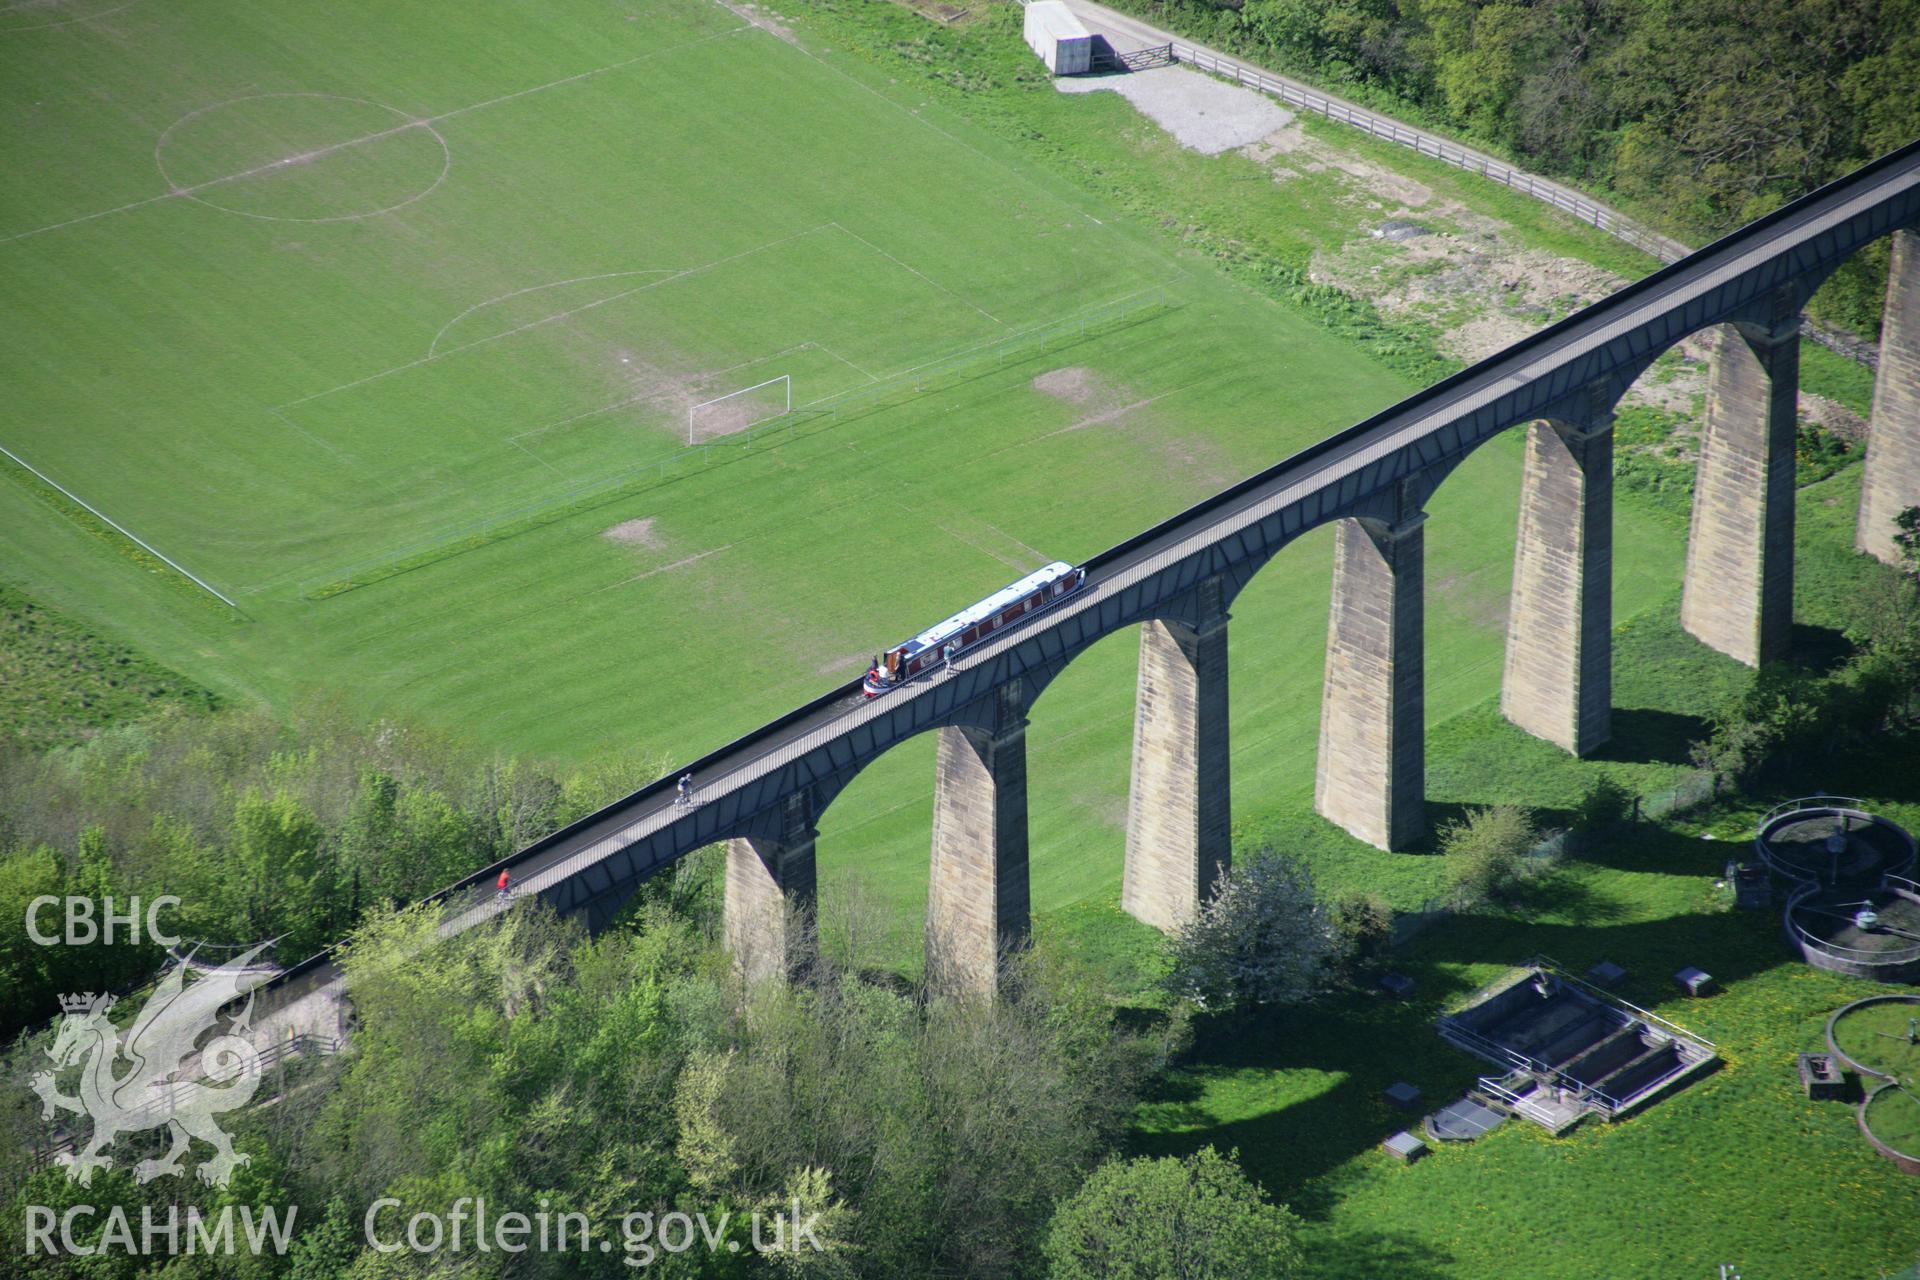 RCAHMW digital colour oblique photograph of a barge on the Pontcysyllte Aqueduct looking north-west. Taken on 05/05/2006 by T.G. Driver.